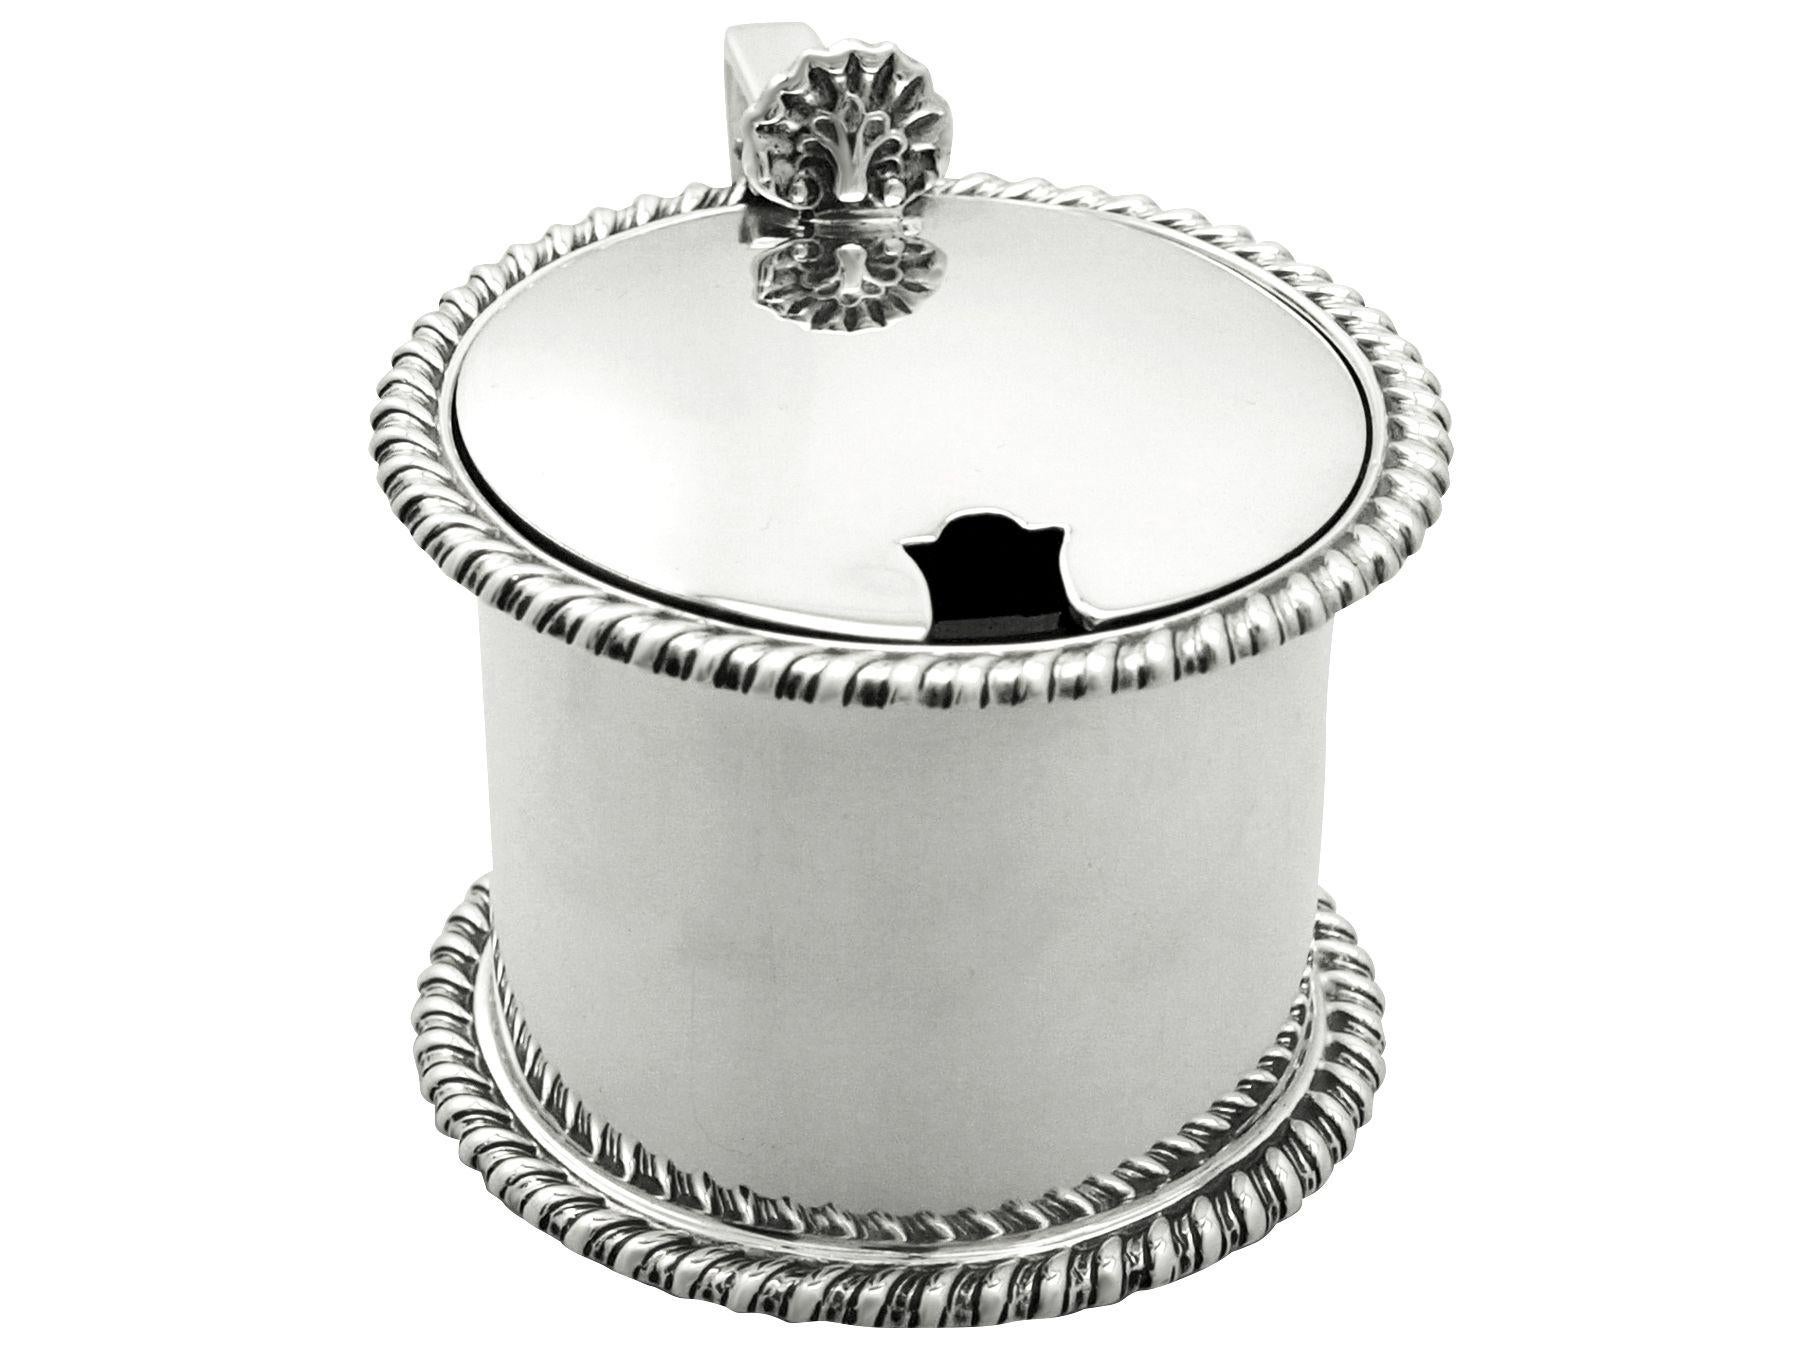 A fine and impressive antique George V English sterling silver drum mustard pot; an addition to our silver cruets/condiments collection.

This fine antique George V sterling silver mustard pot has a plain cylindrical, drum form onto a circular